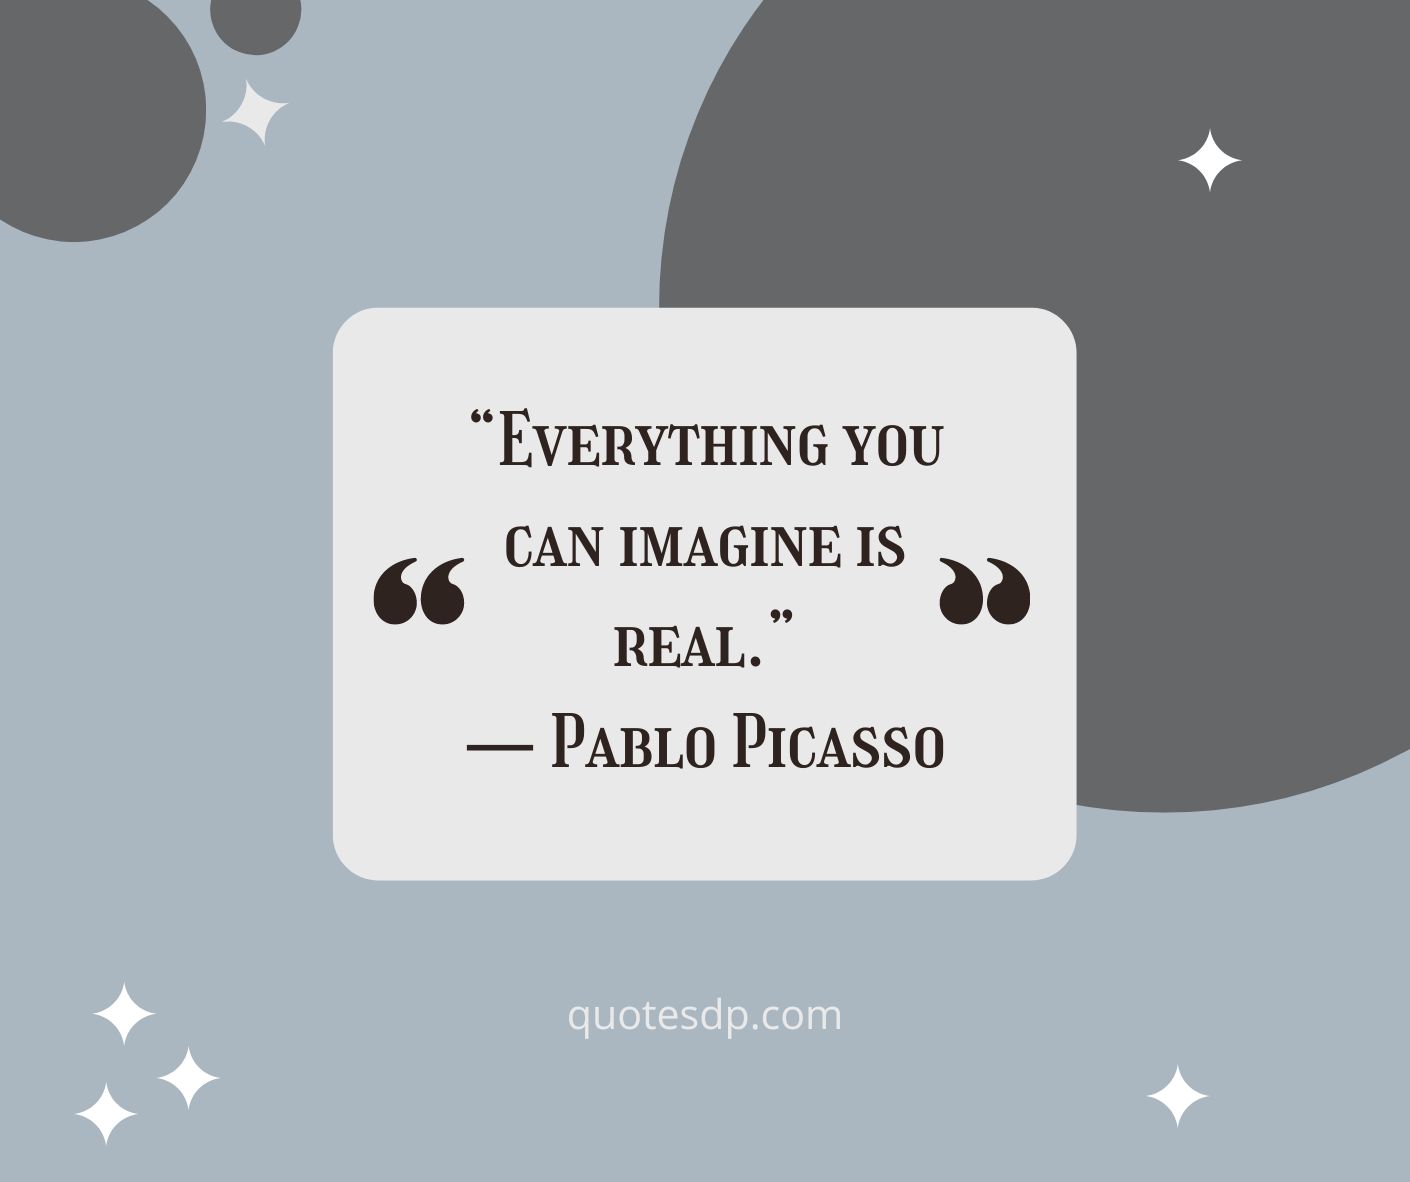 Pablo Picasso life quotes imagine real